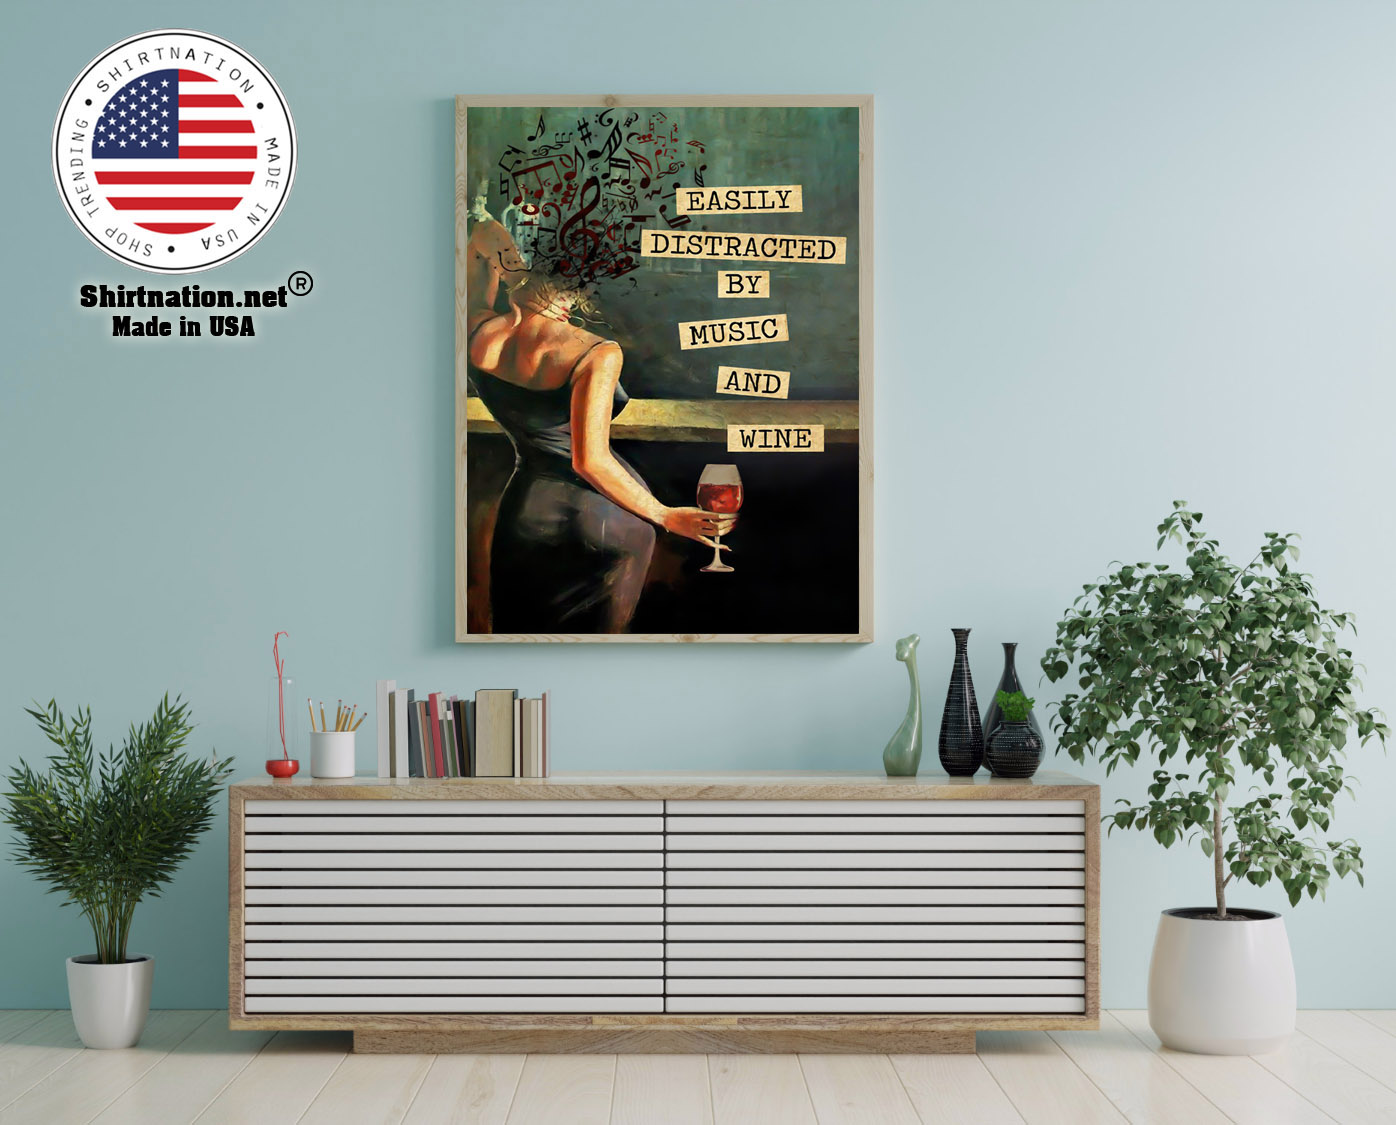 Vintage easily distracted by music and wine poster 12